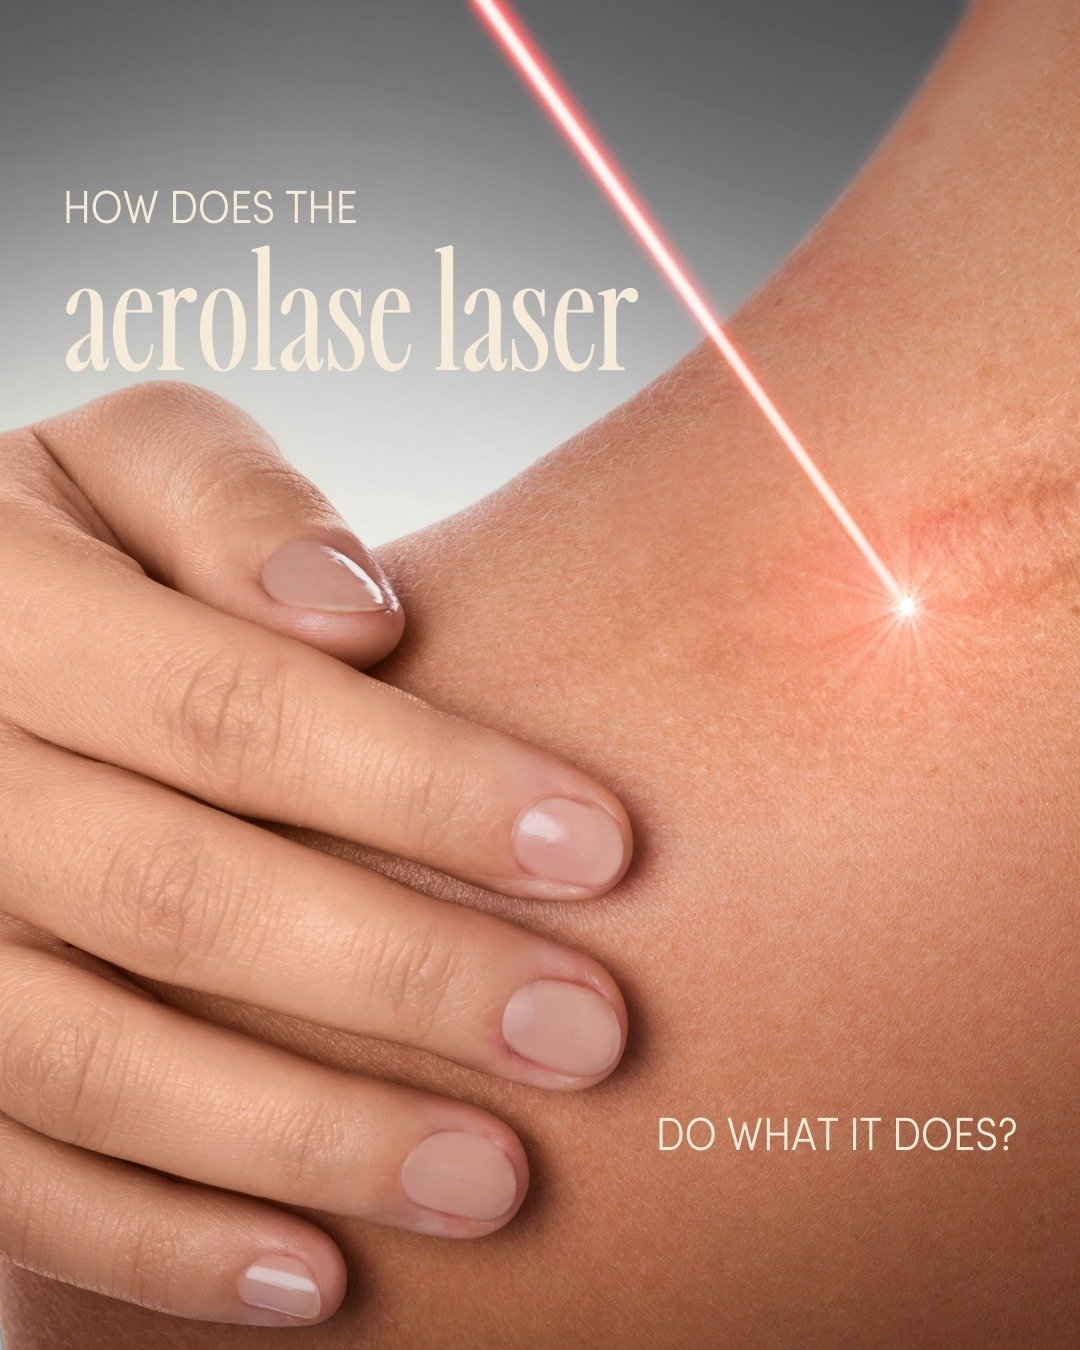 Aerolase is a state-of-the-art aesthetic laser used for gentle skin tightening and rejuvenation. It effectively treats over 30 skin conditions, including acne, age spots, and fine lines and wrinkles. Aerolase laser light is attracted to melanin, hemo